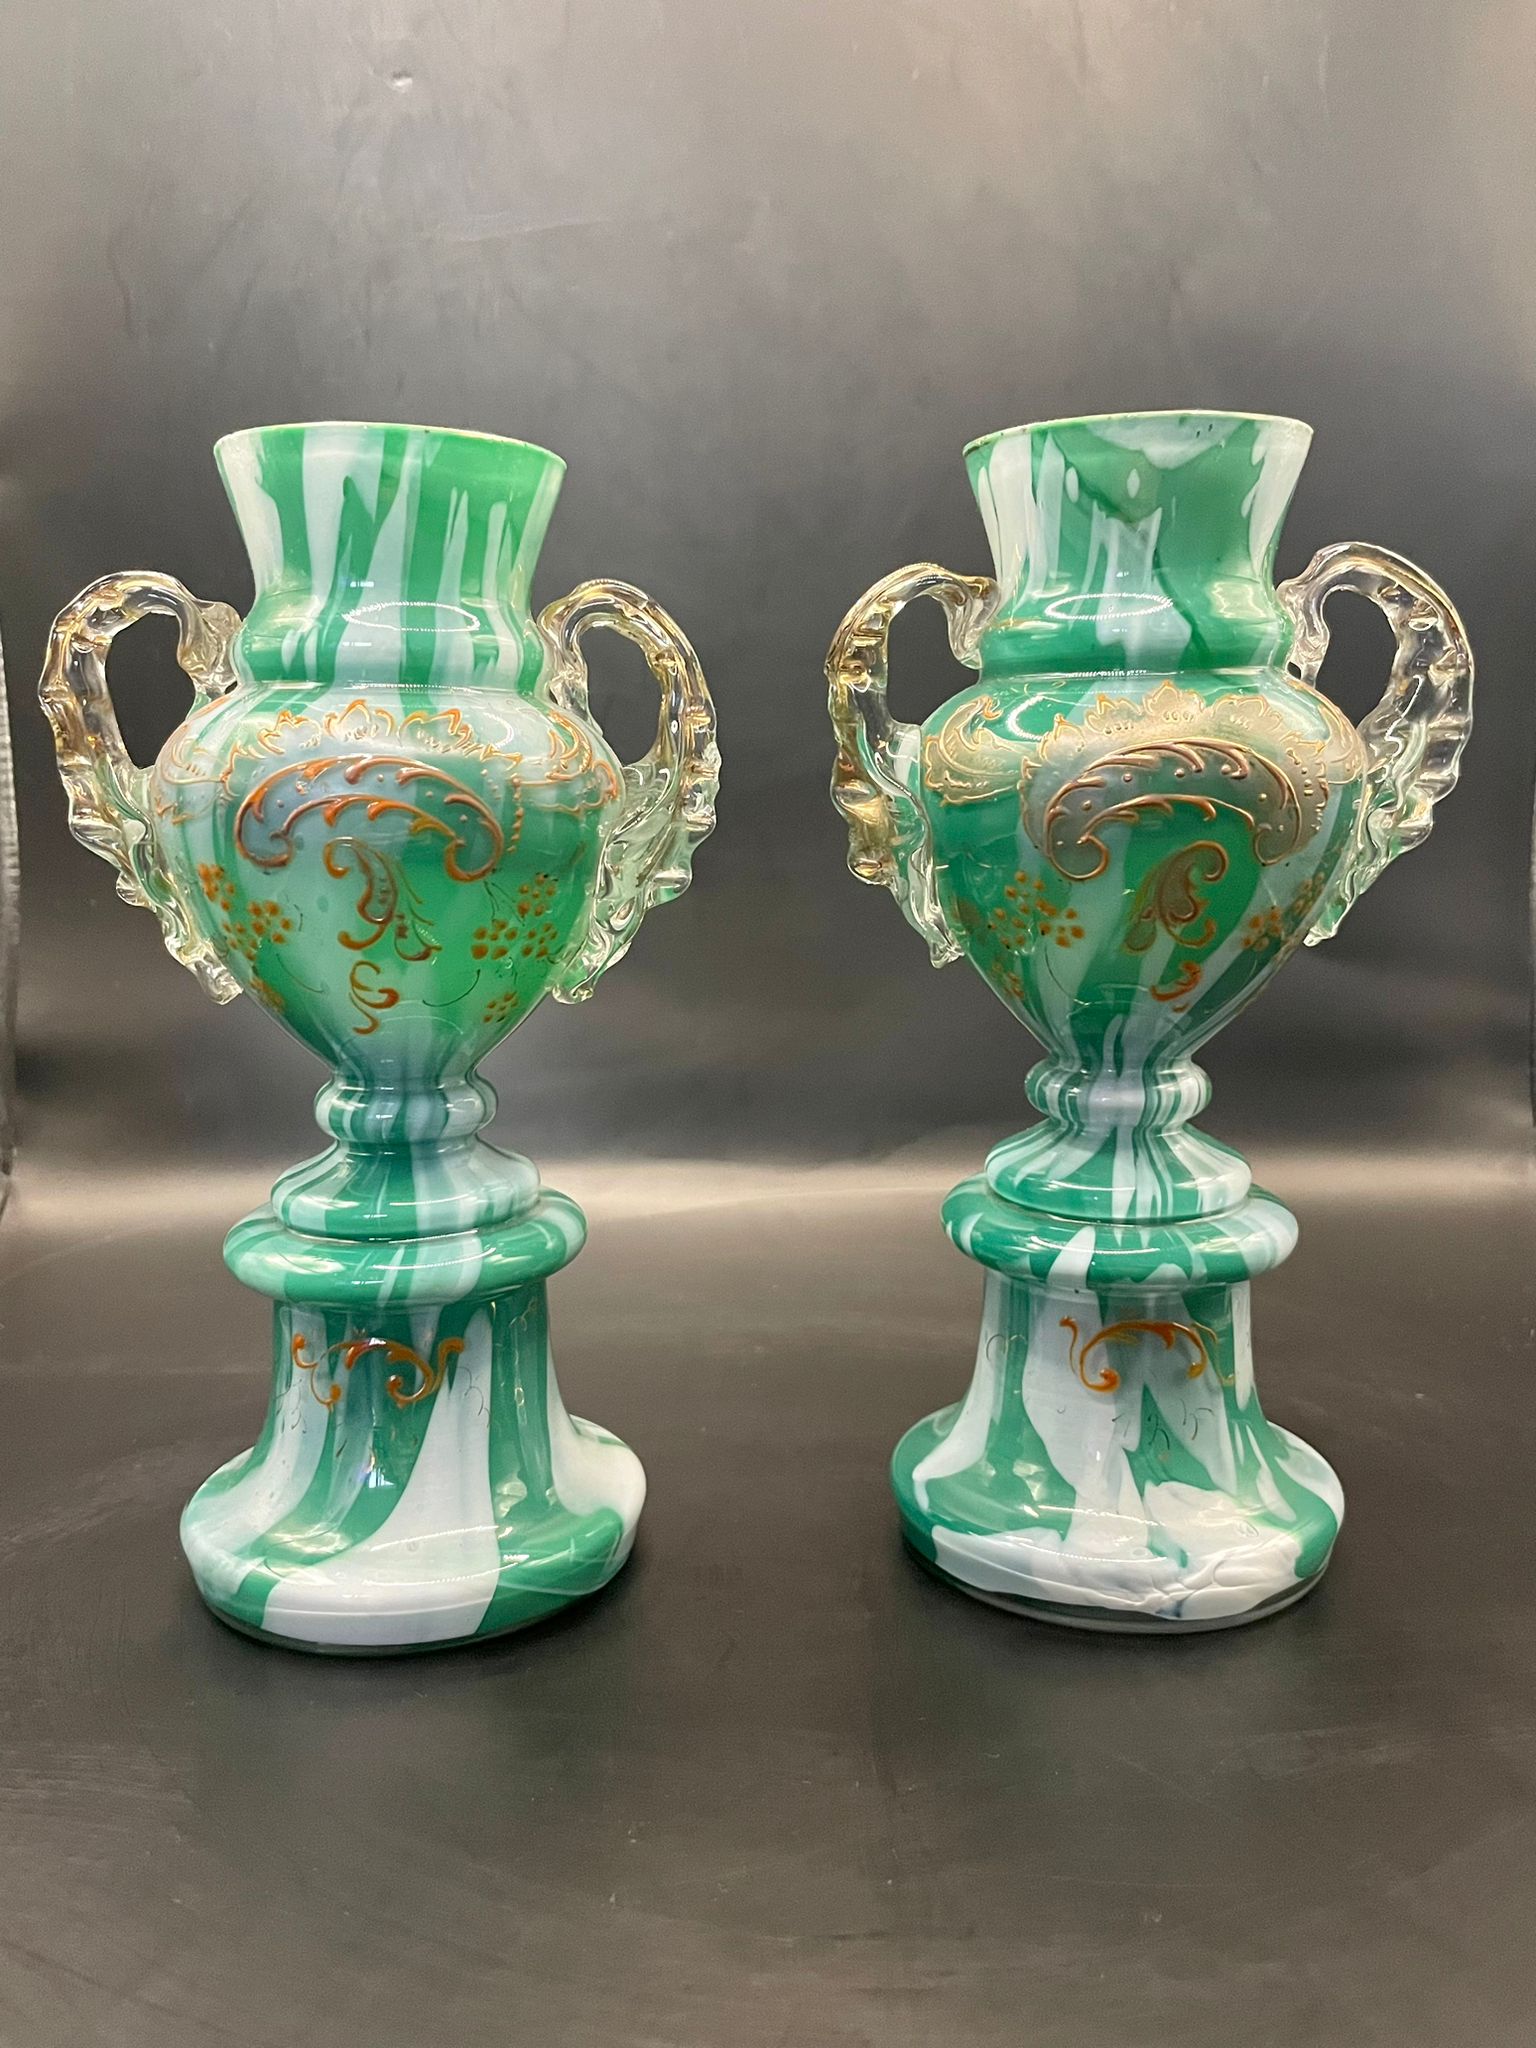 pair of antique Czech/bohemian glass vases which I believe are by franz welz, - Image 11 of 12